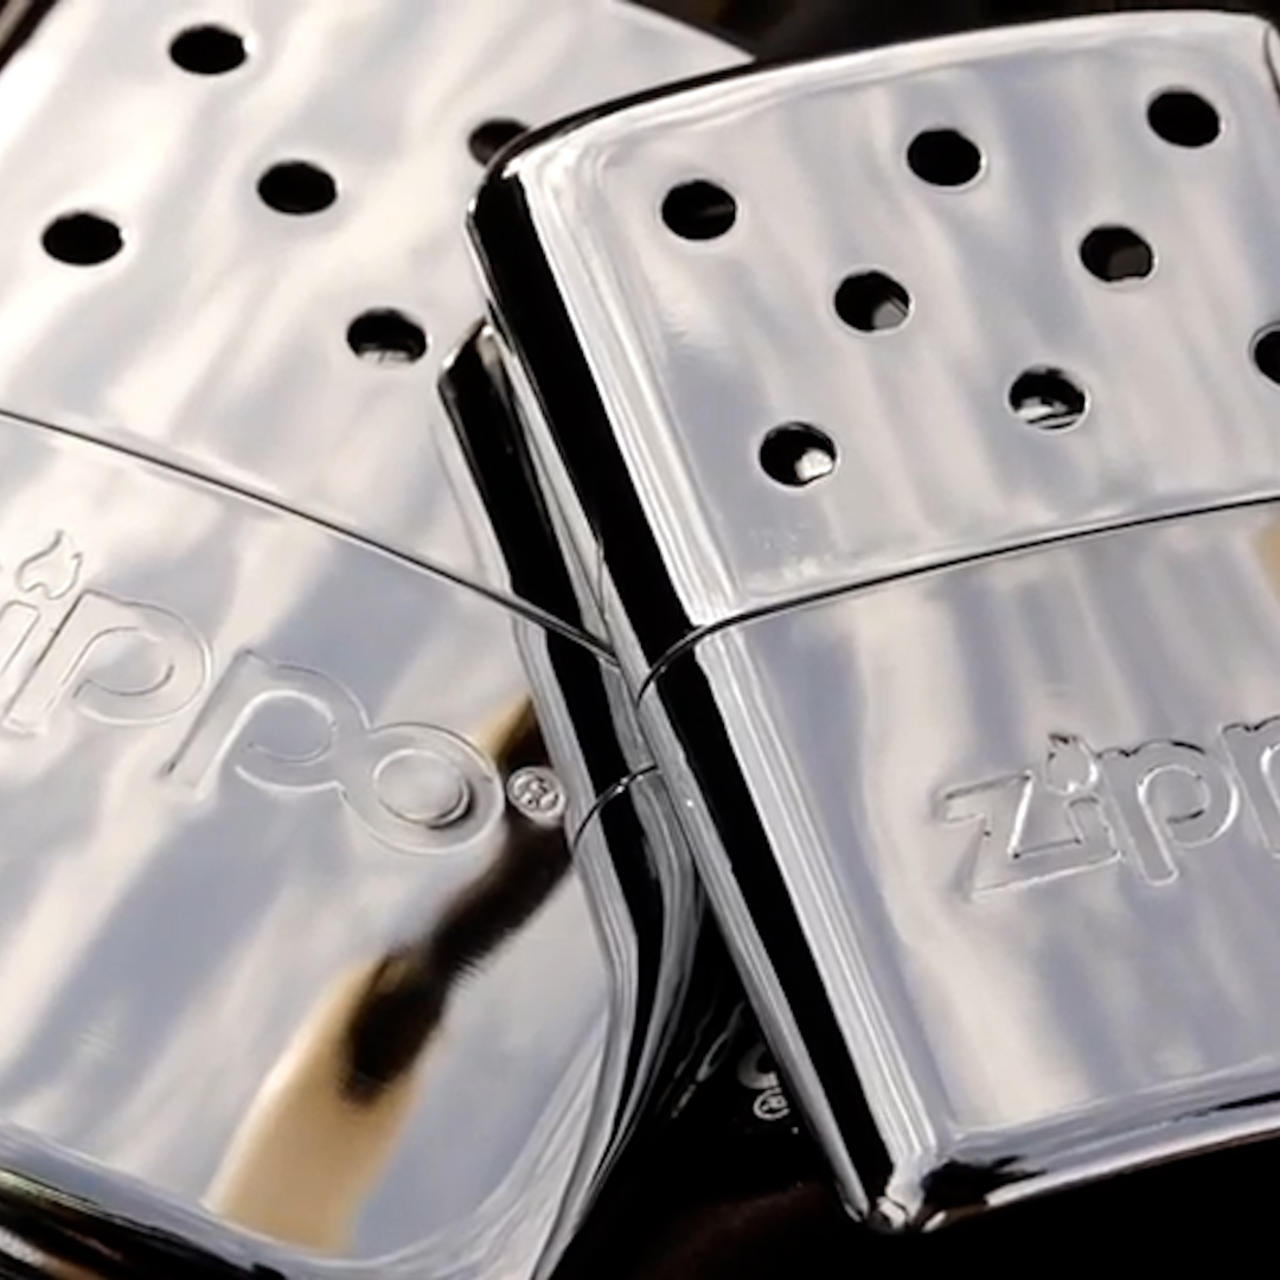 Keep your hands toasty with these Zippo hand warmers